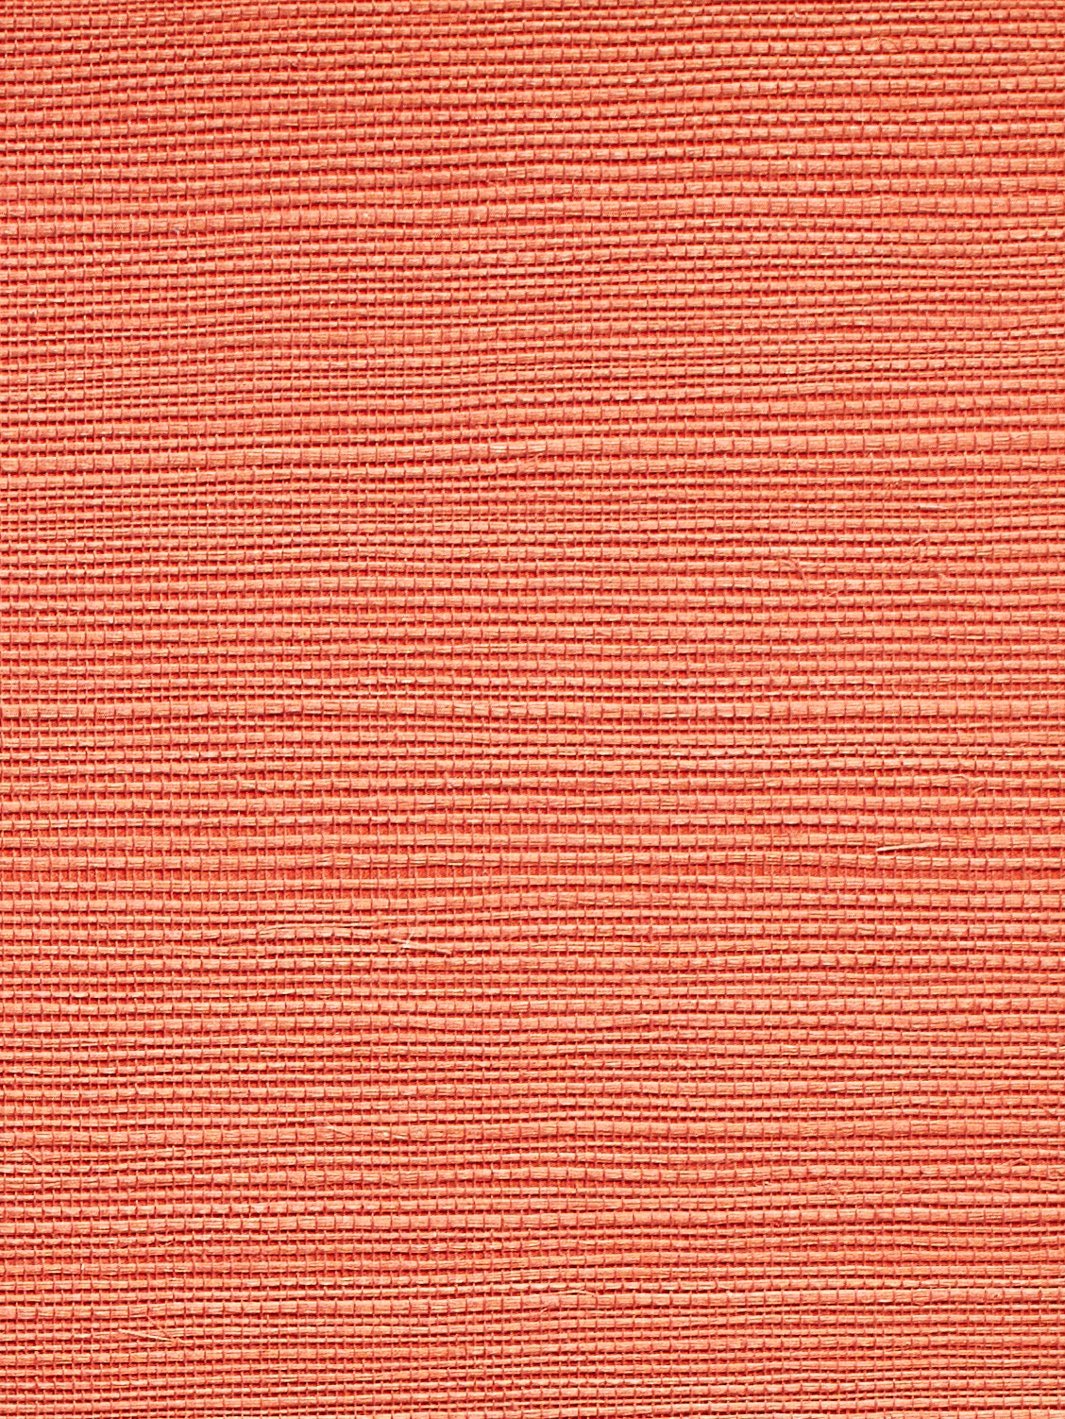 'Solid Grasscloth' Wallpaper by Wallshoppe - Persimmon